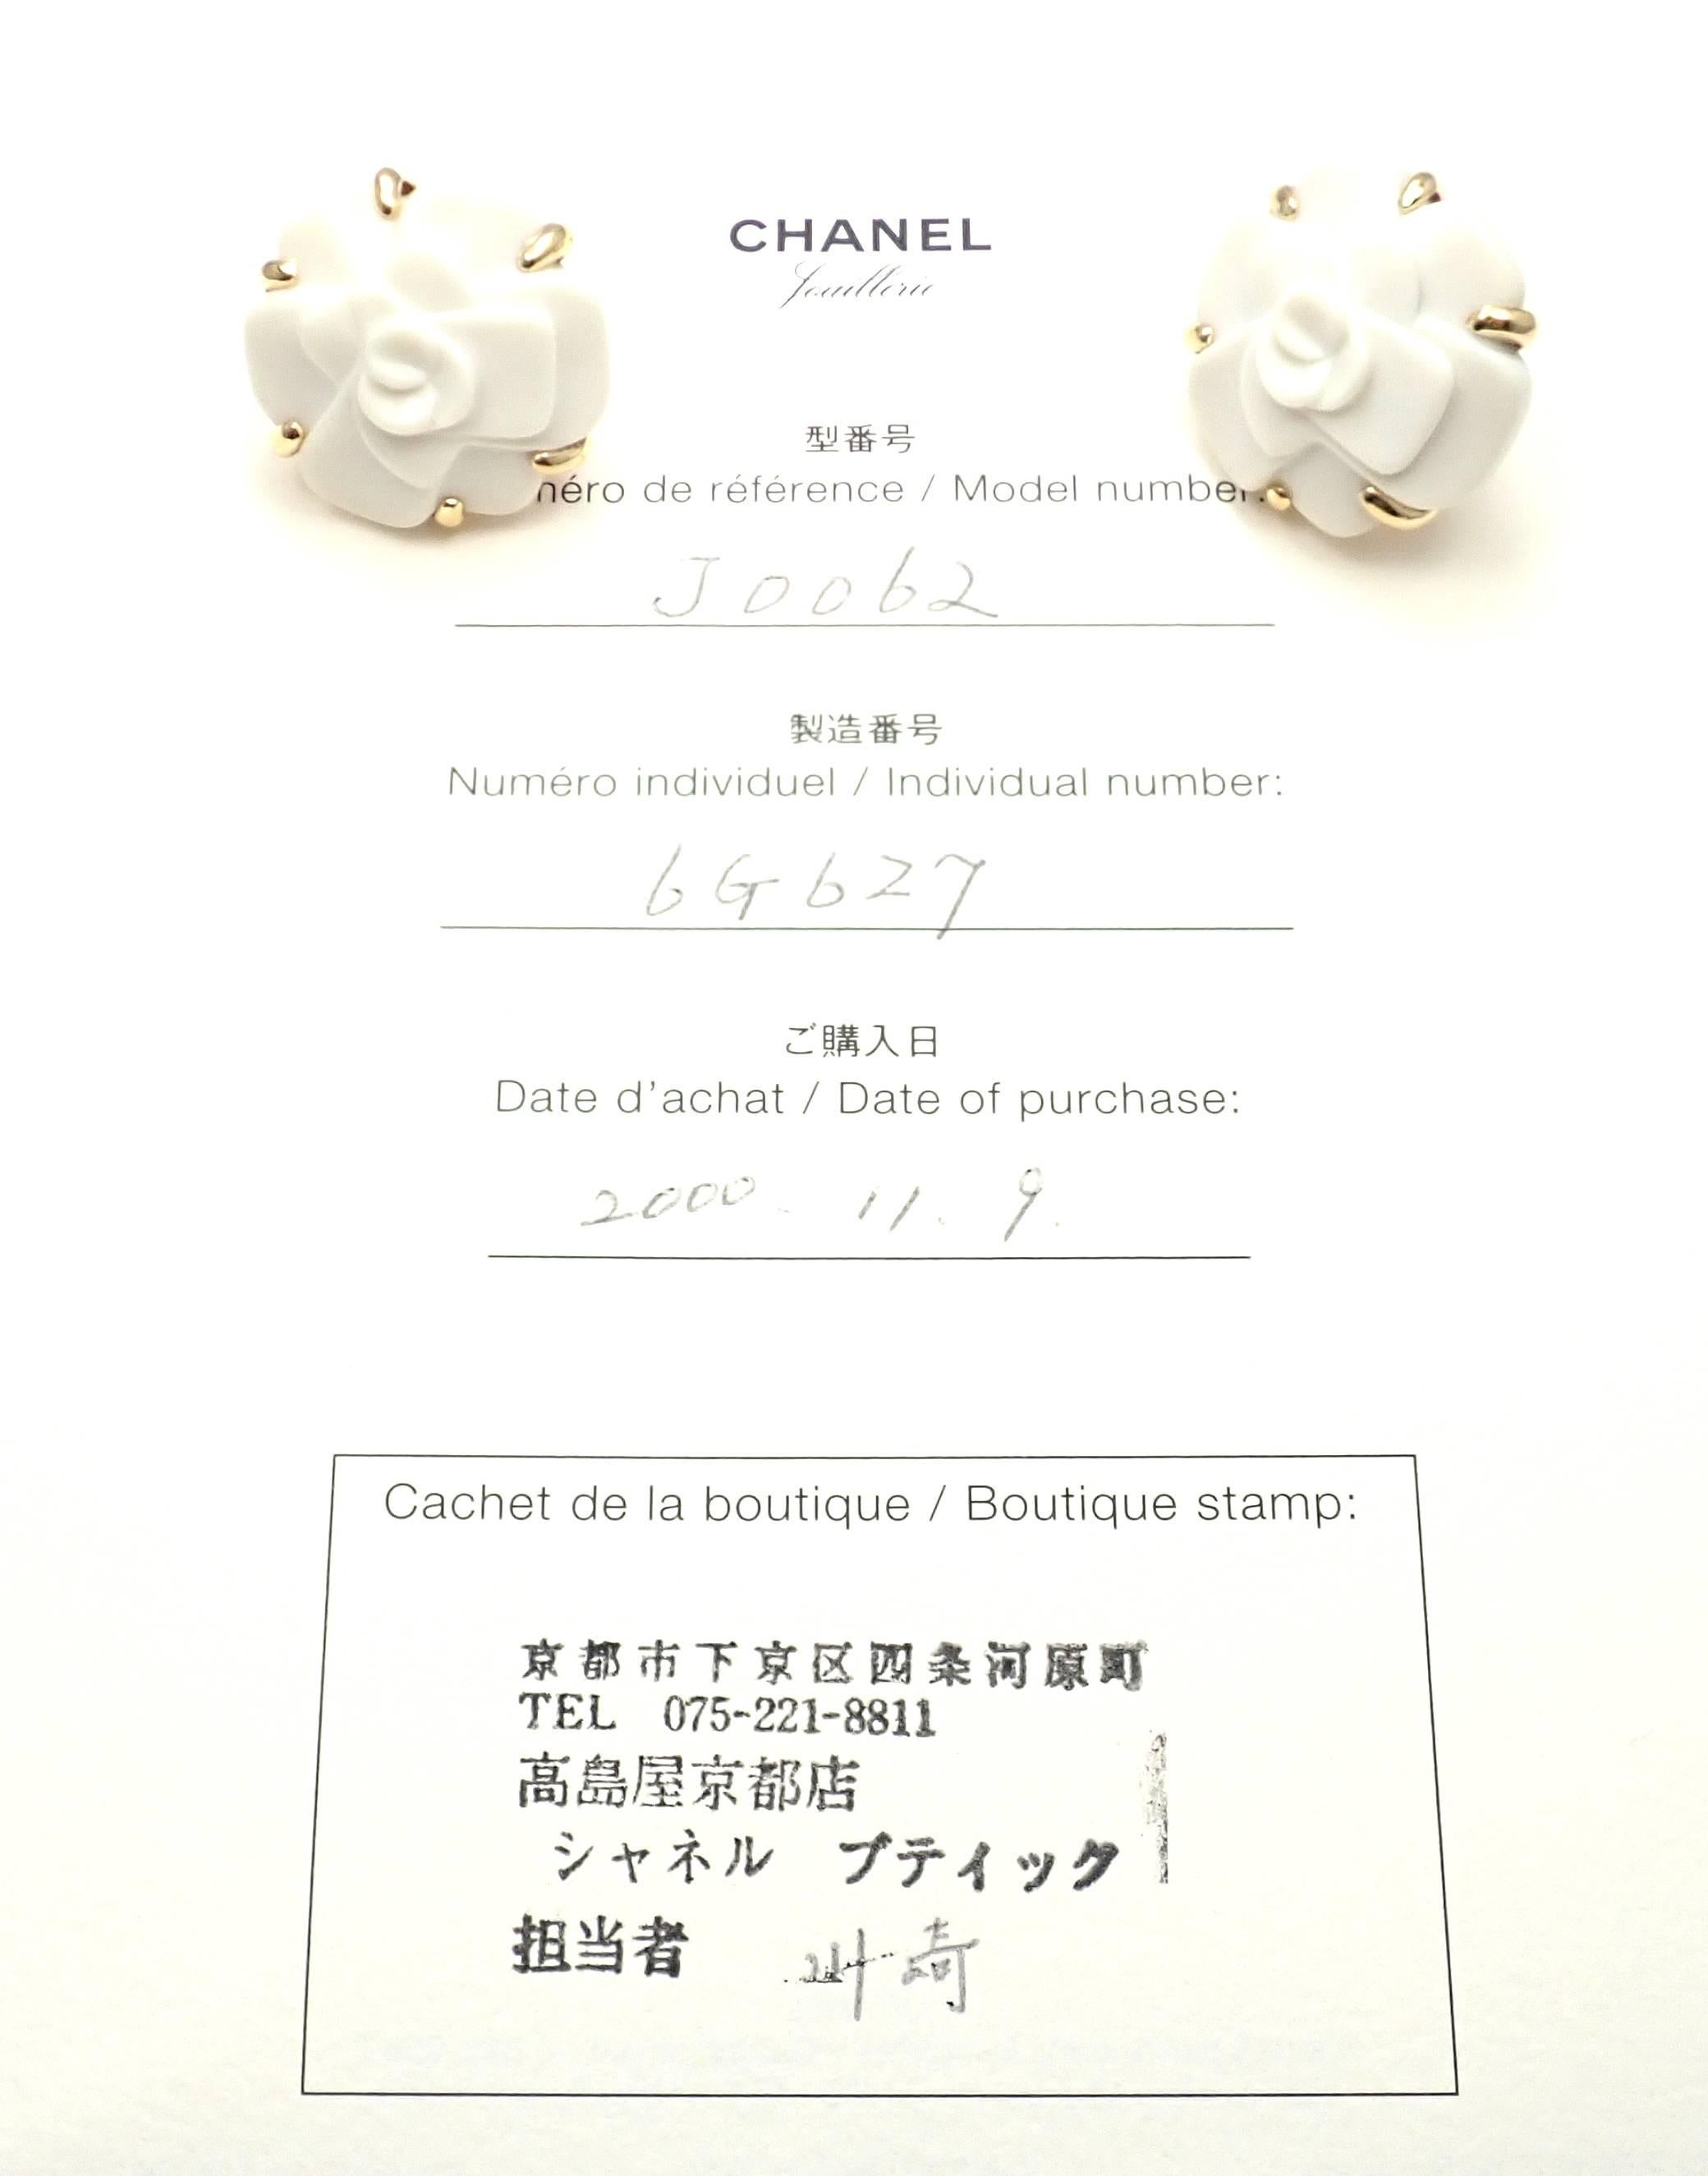 18k Yellow Gold White Agate Camellia Camelia Flower Earrings by Chanel. 
With 2 white agate flower stones.
There earrings come with paper from Chanel.
These earrings are made for pierced ears.
Details: 
Measurements: 26mm
Weight:  24.7 grams
Stamped